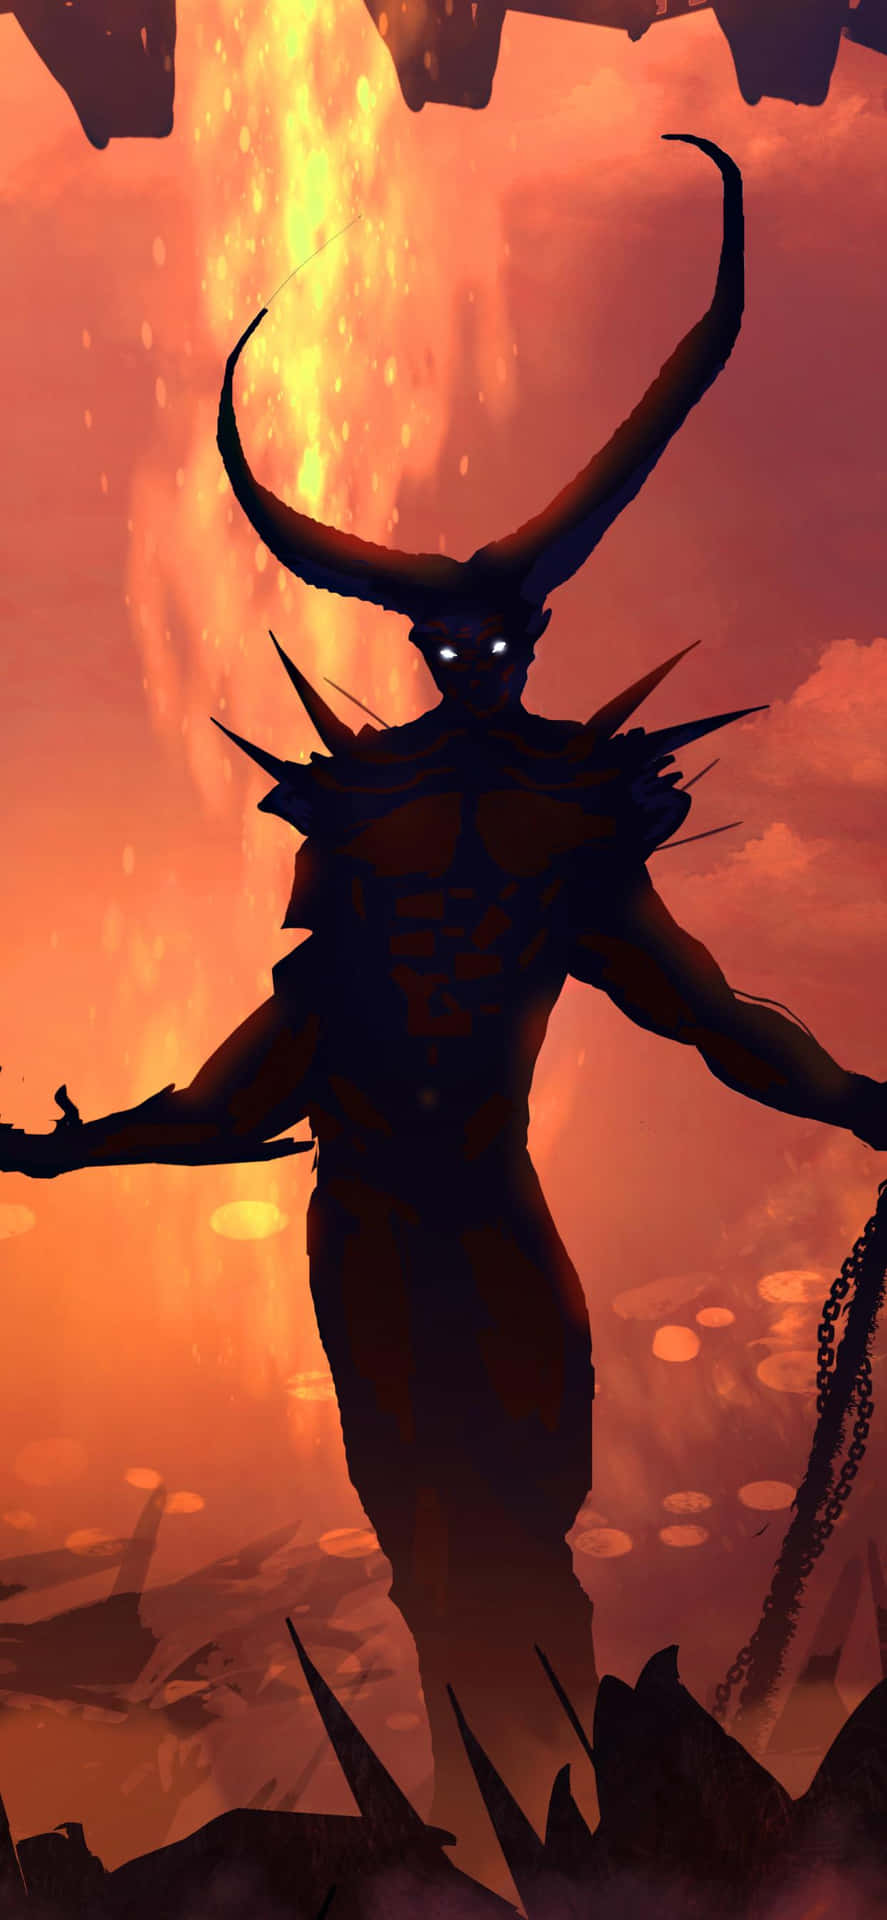 A Demon With Horns Standing In Front Of A Fire Wallpaper